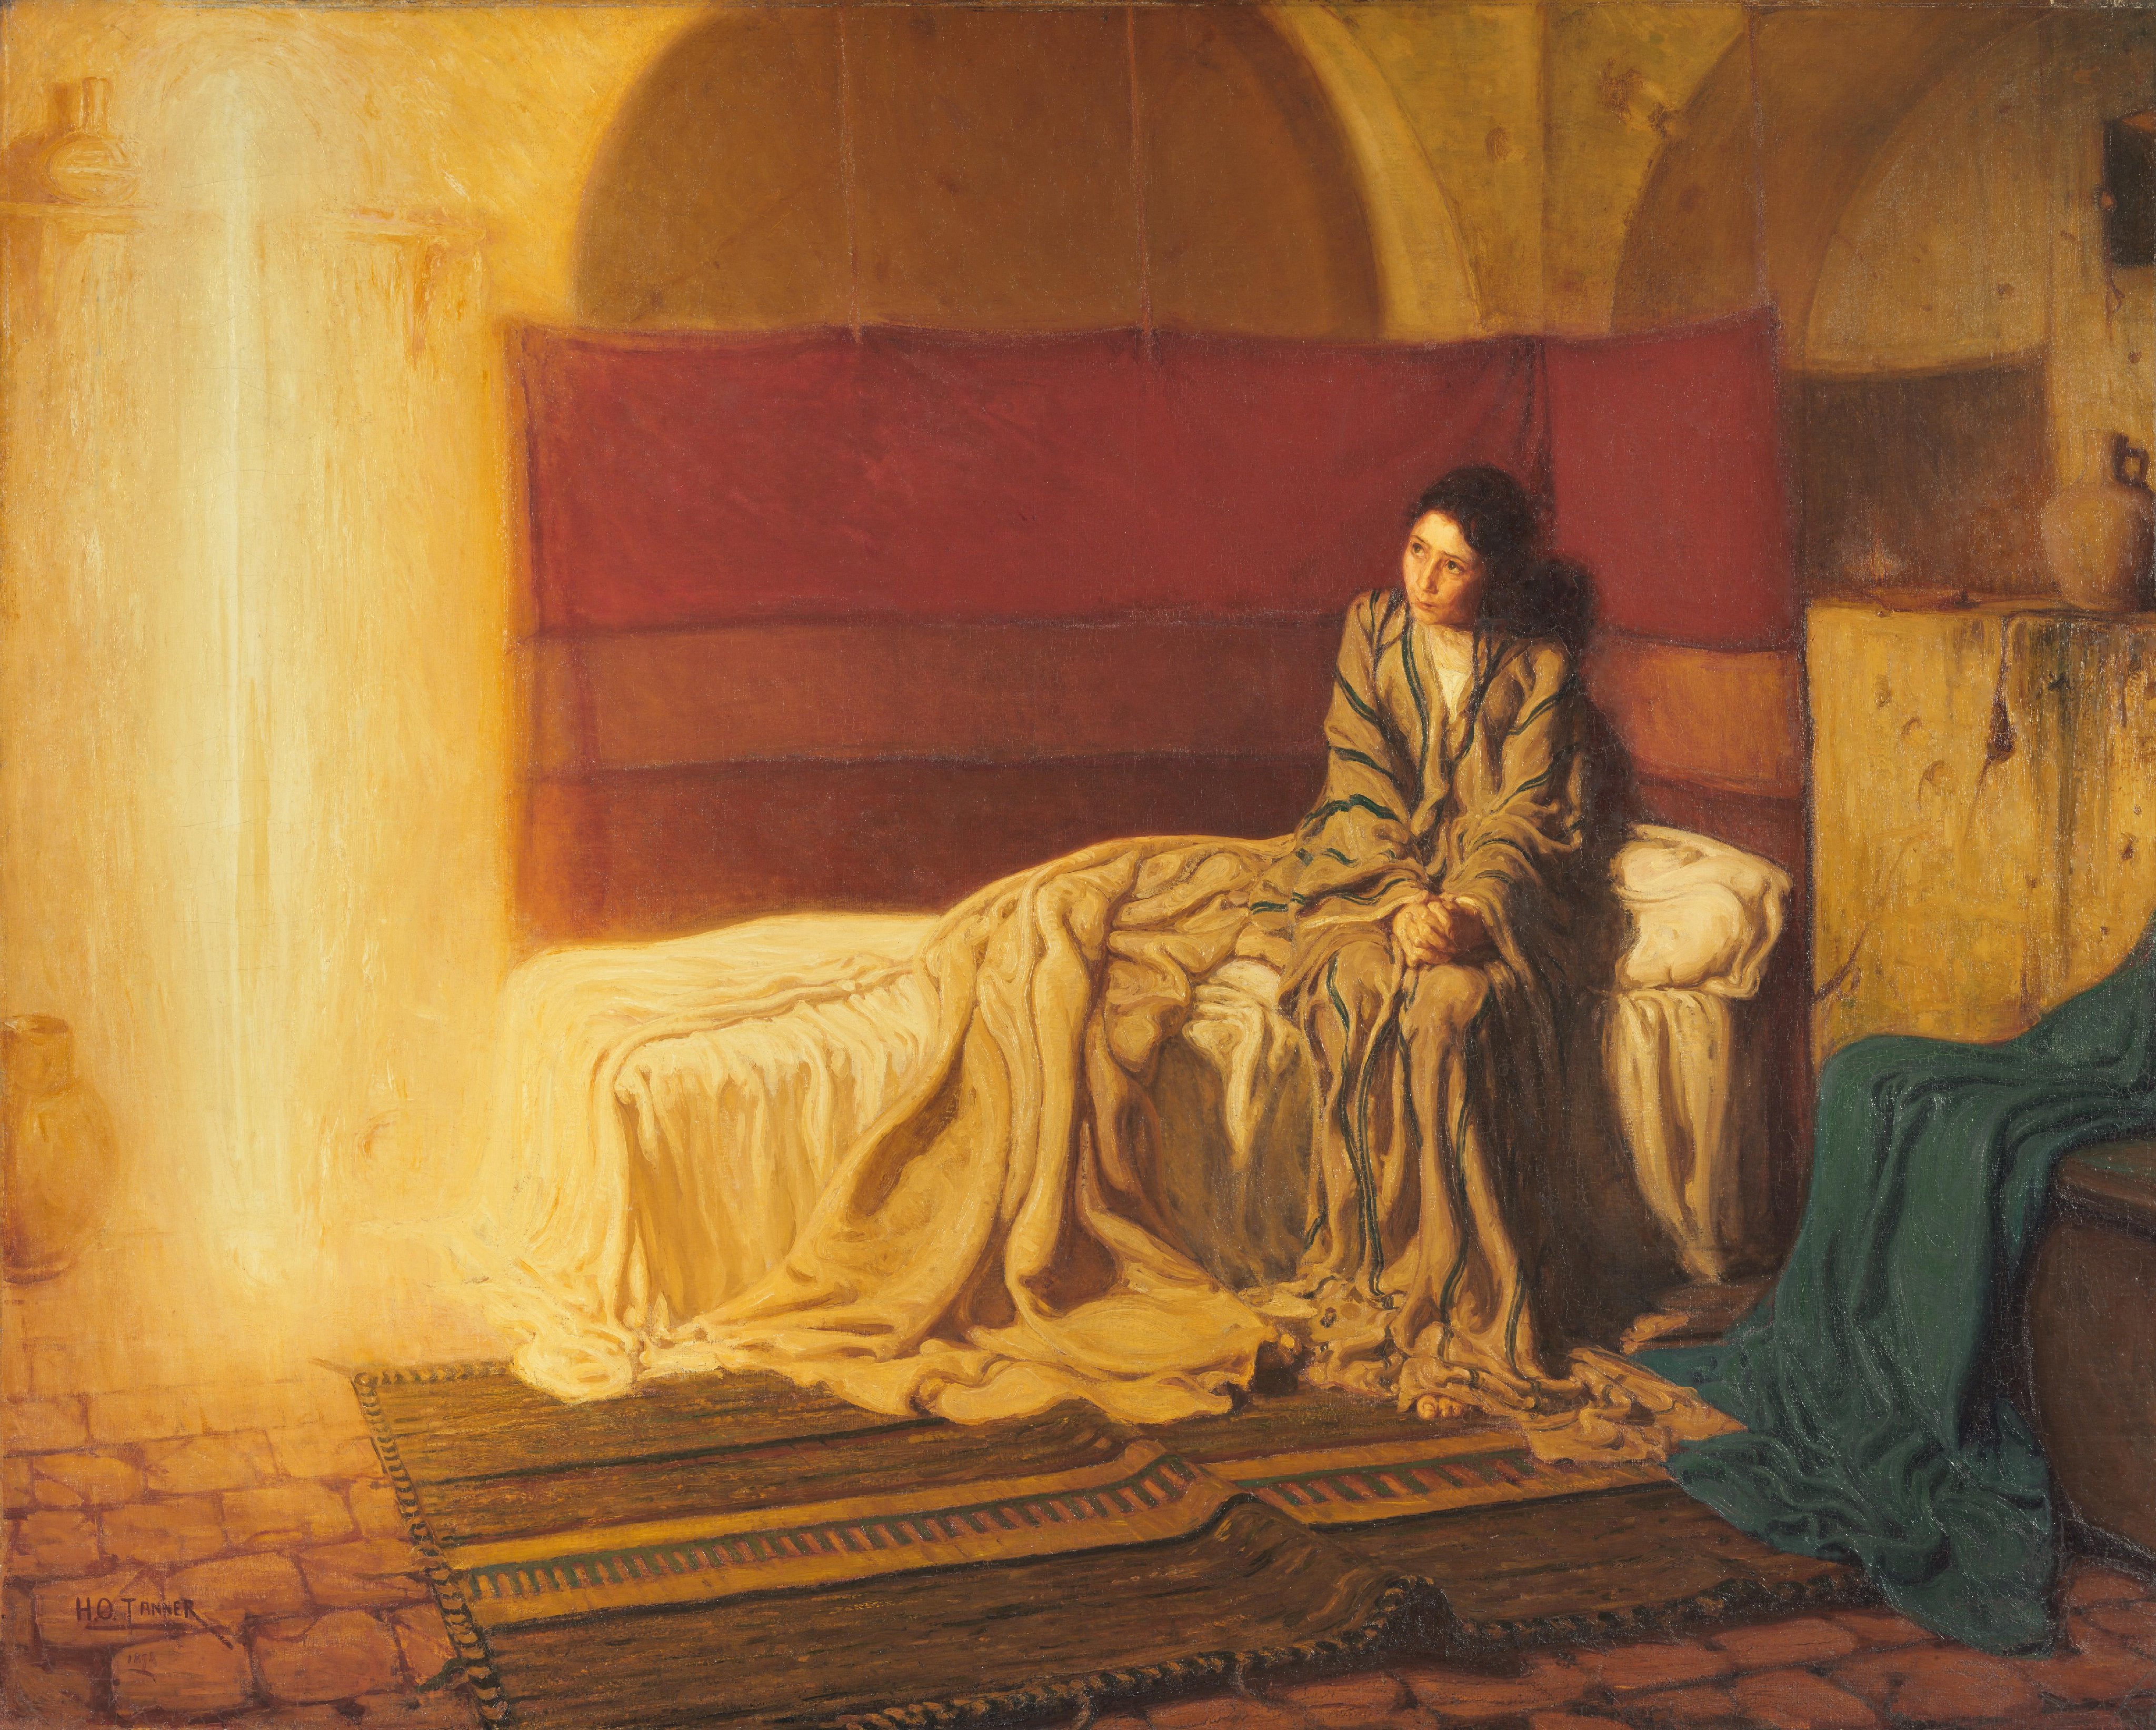 Painting of Mary at the Annunciation. On the left there is a strong bright light, and Mary is sitting on a bed on the right. She is a young woman, wrapped in a blanket, and is looking in awe at the light.